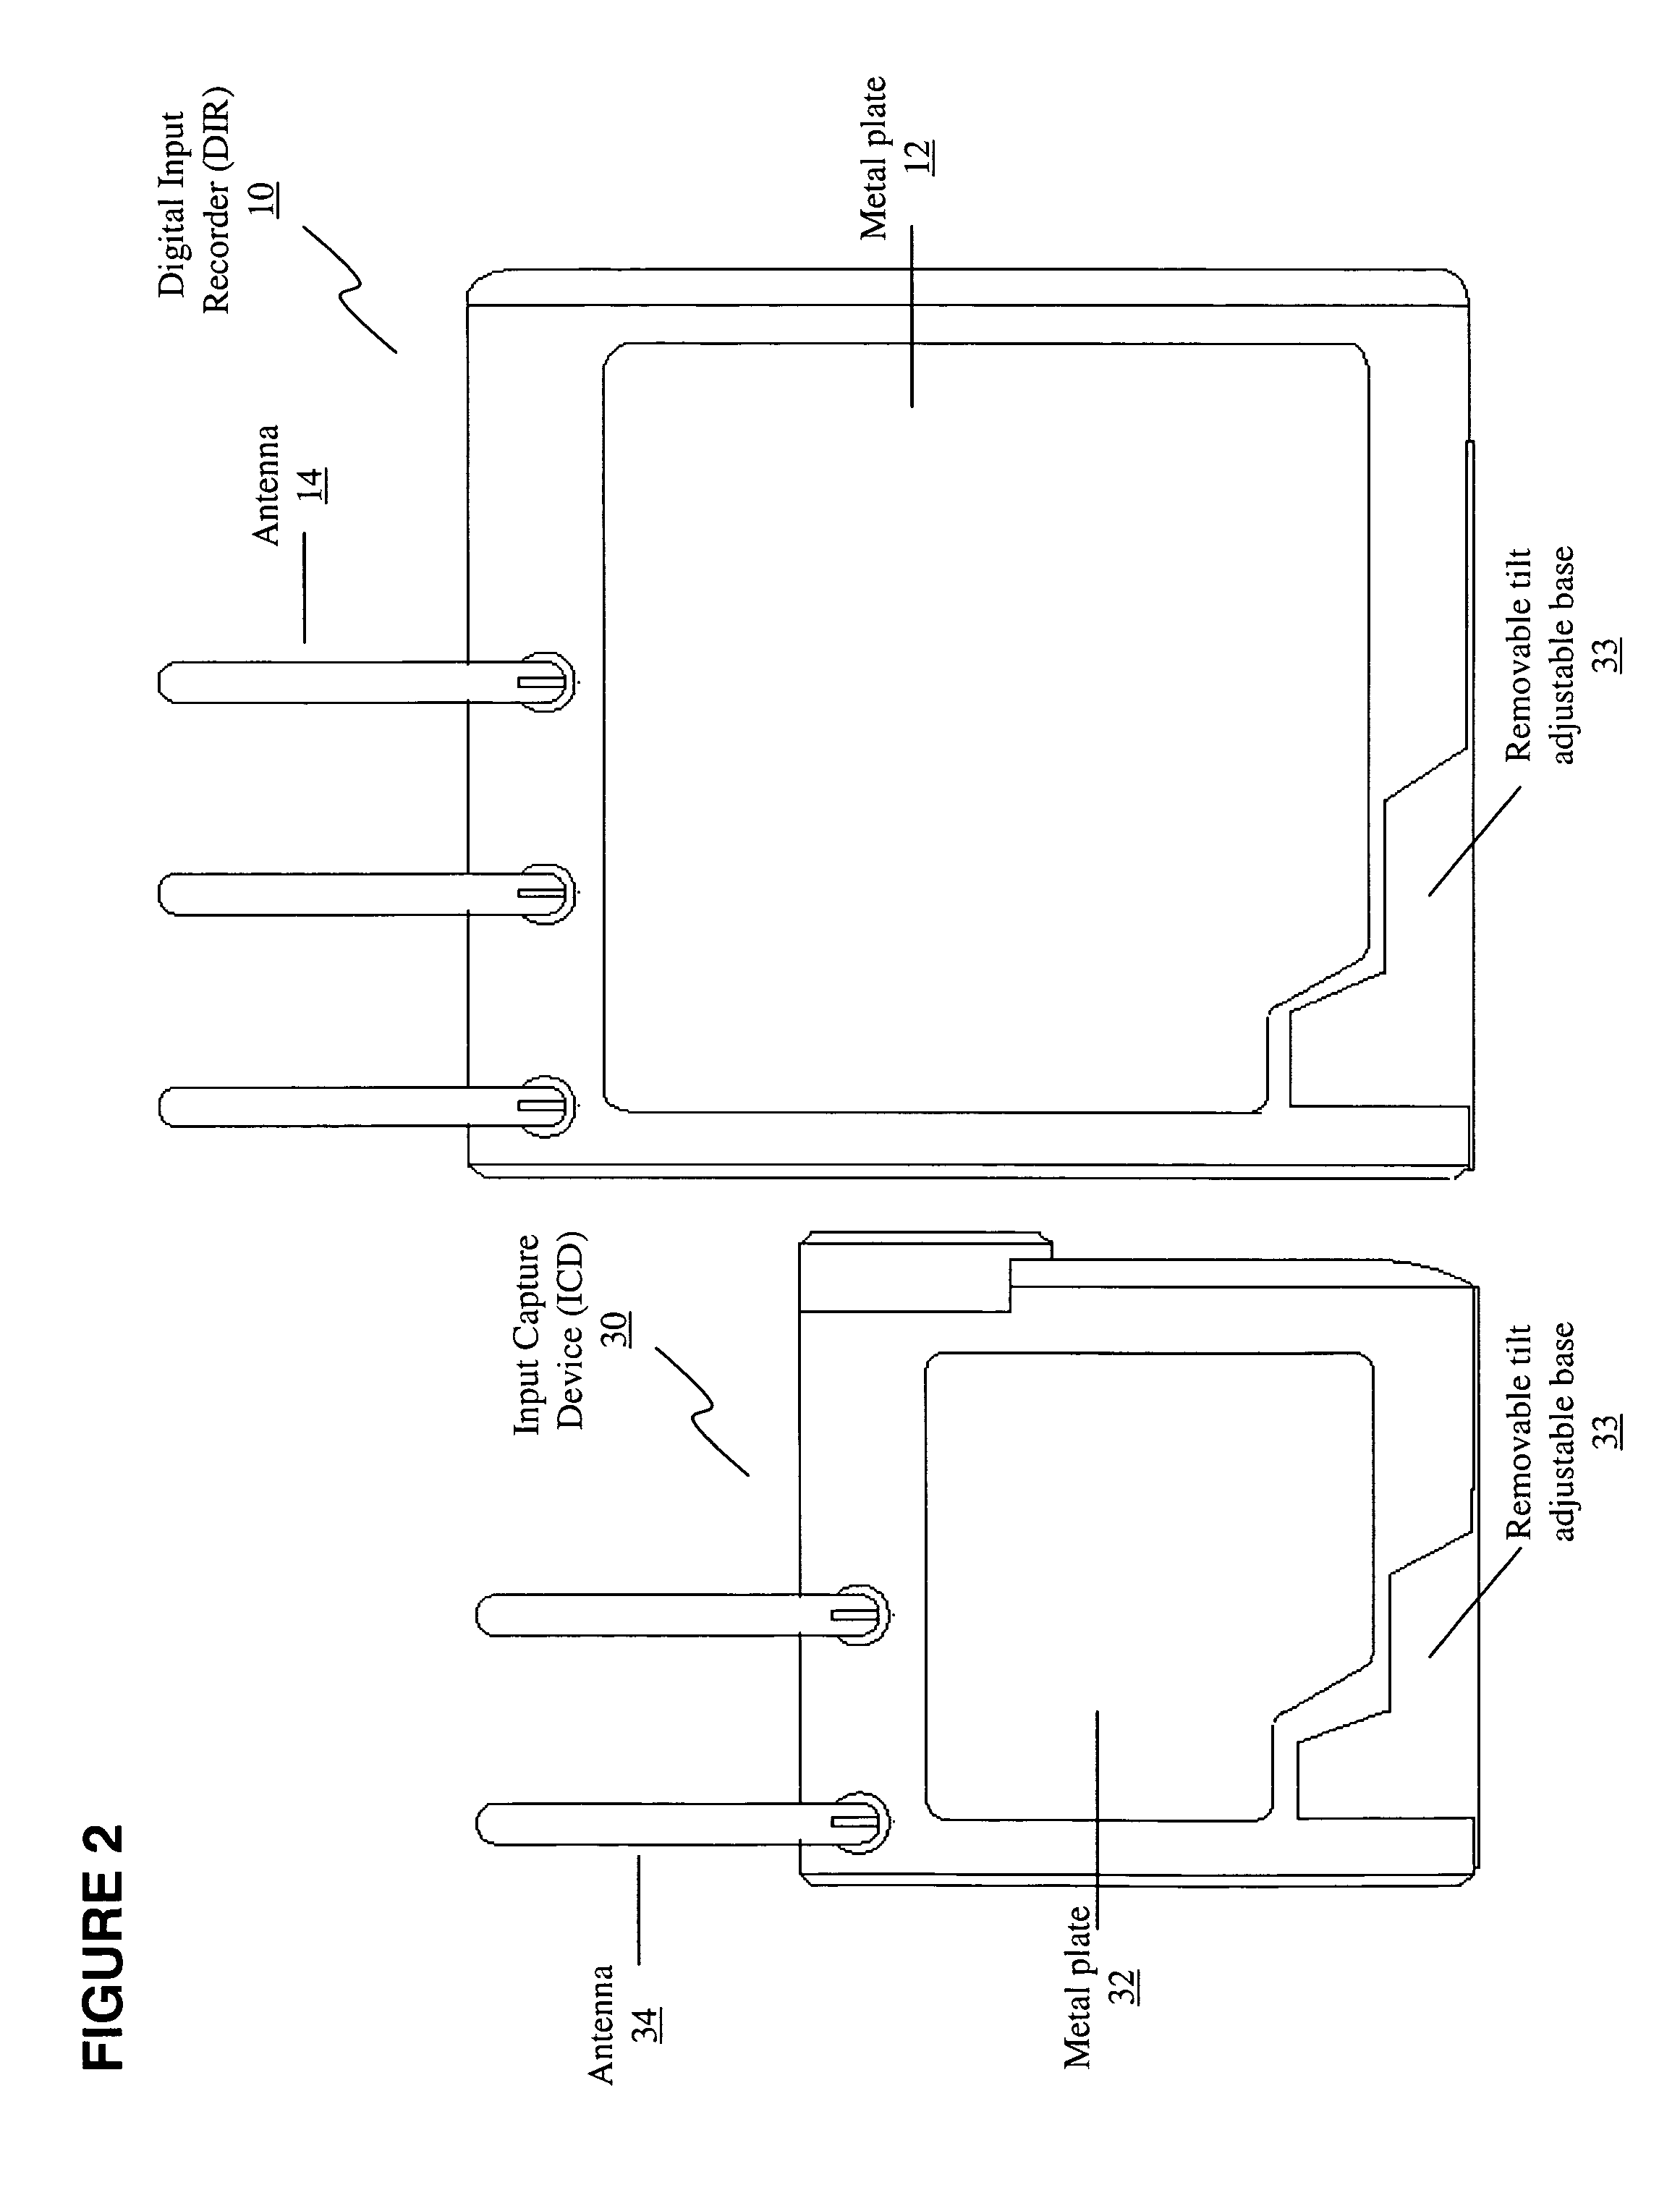 Wireless video surveillance system and method with single click-select actions